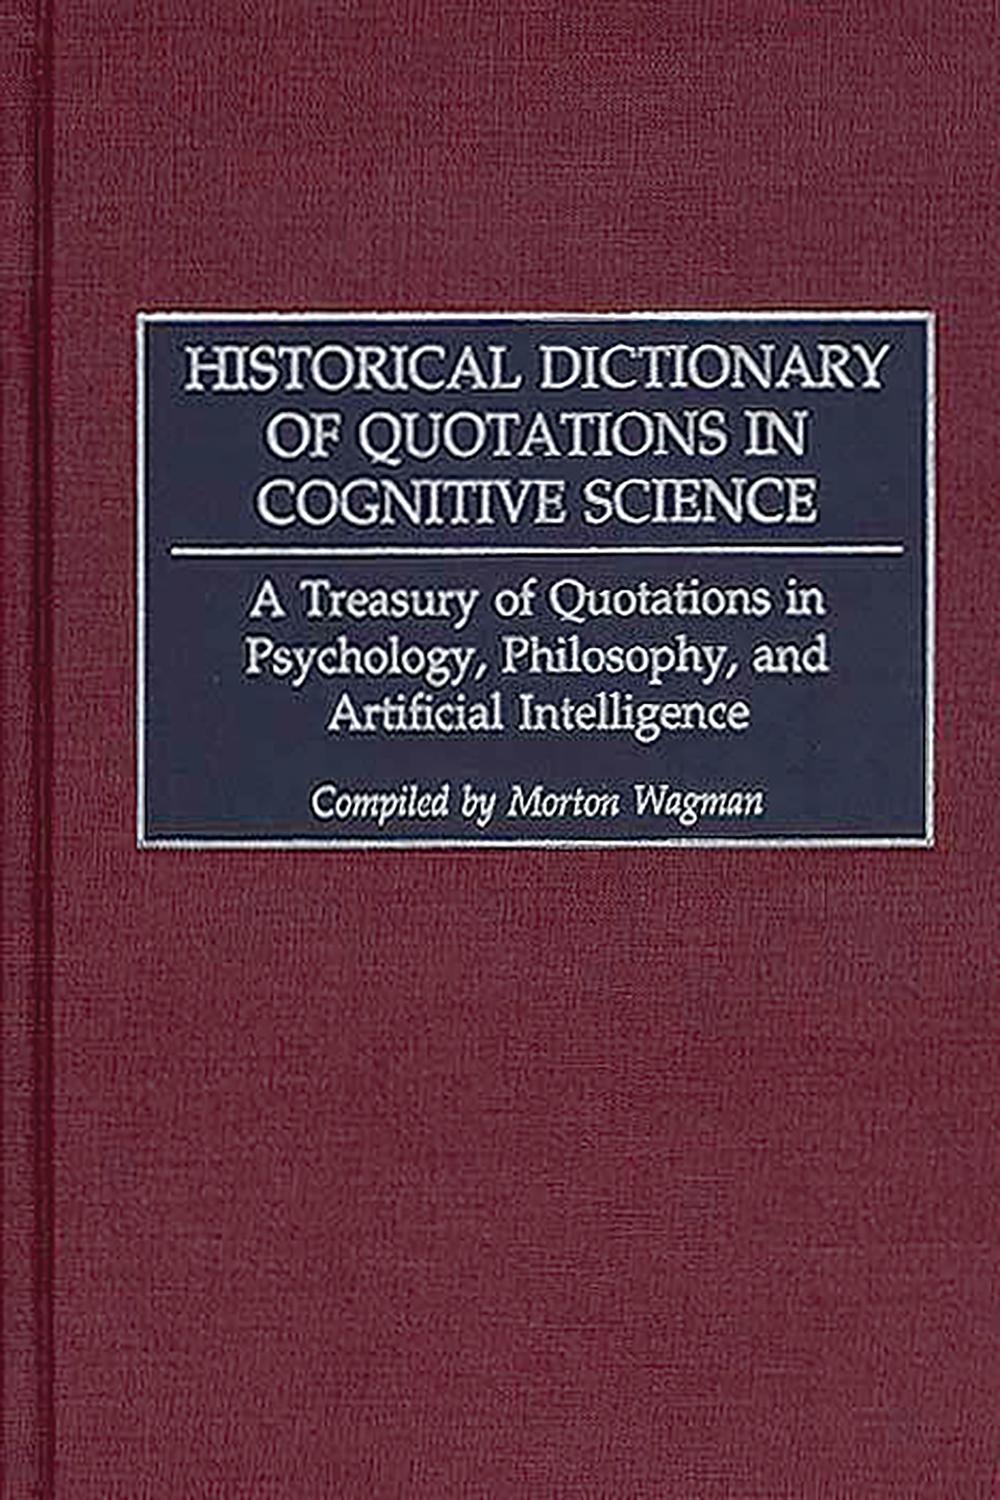 Historical Dictionary of Quotations in Cognitive Science - Morton Wagman